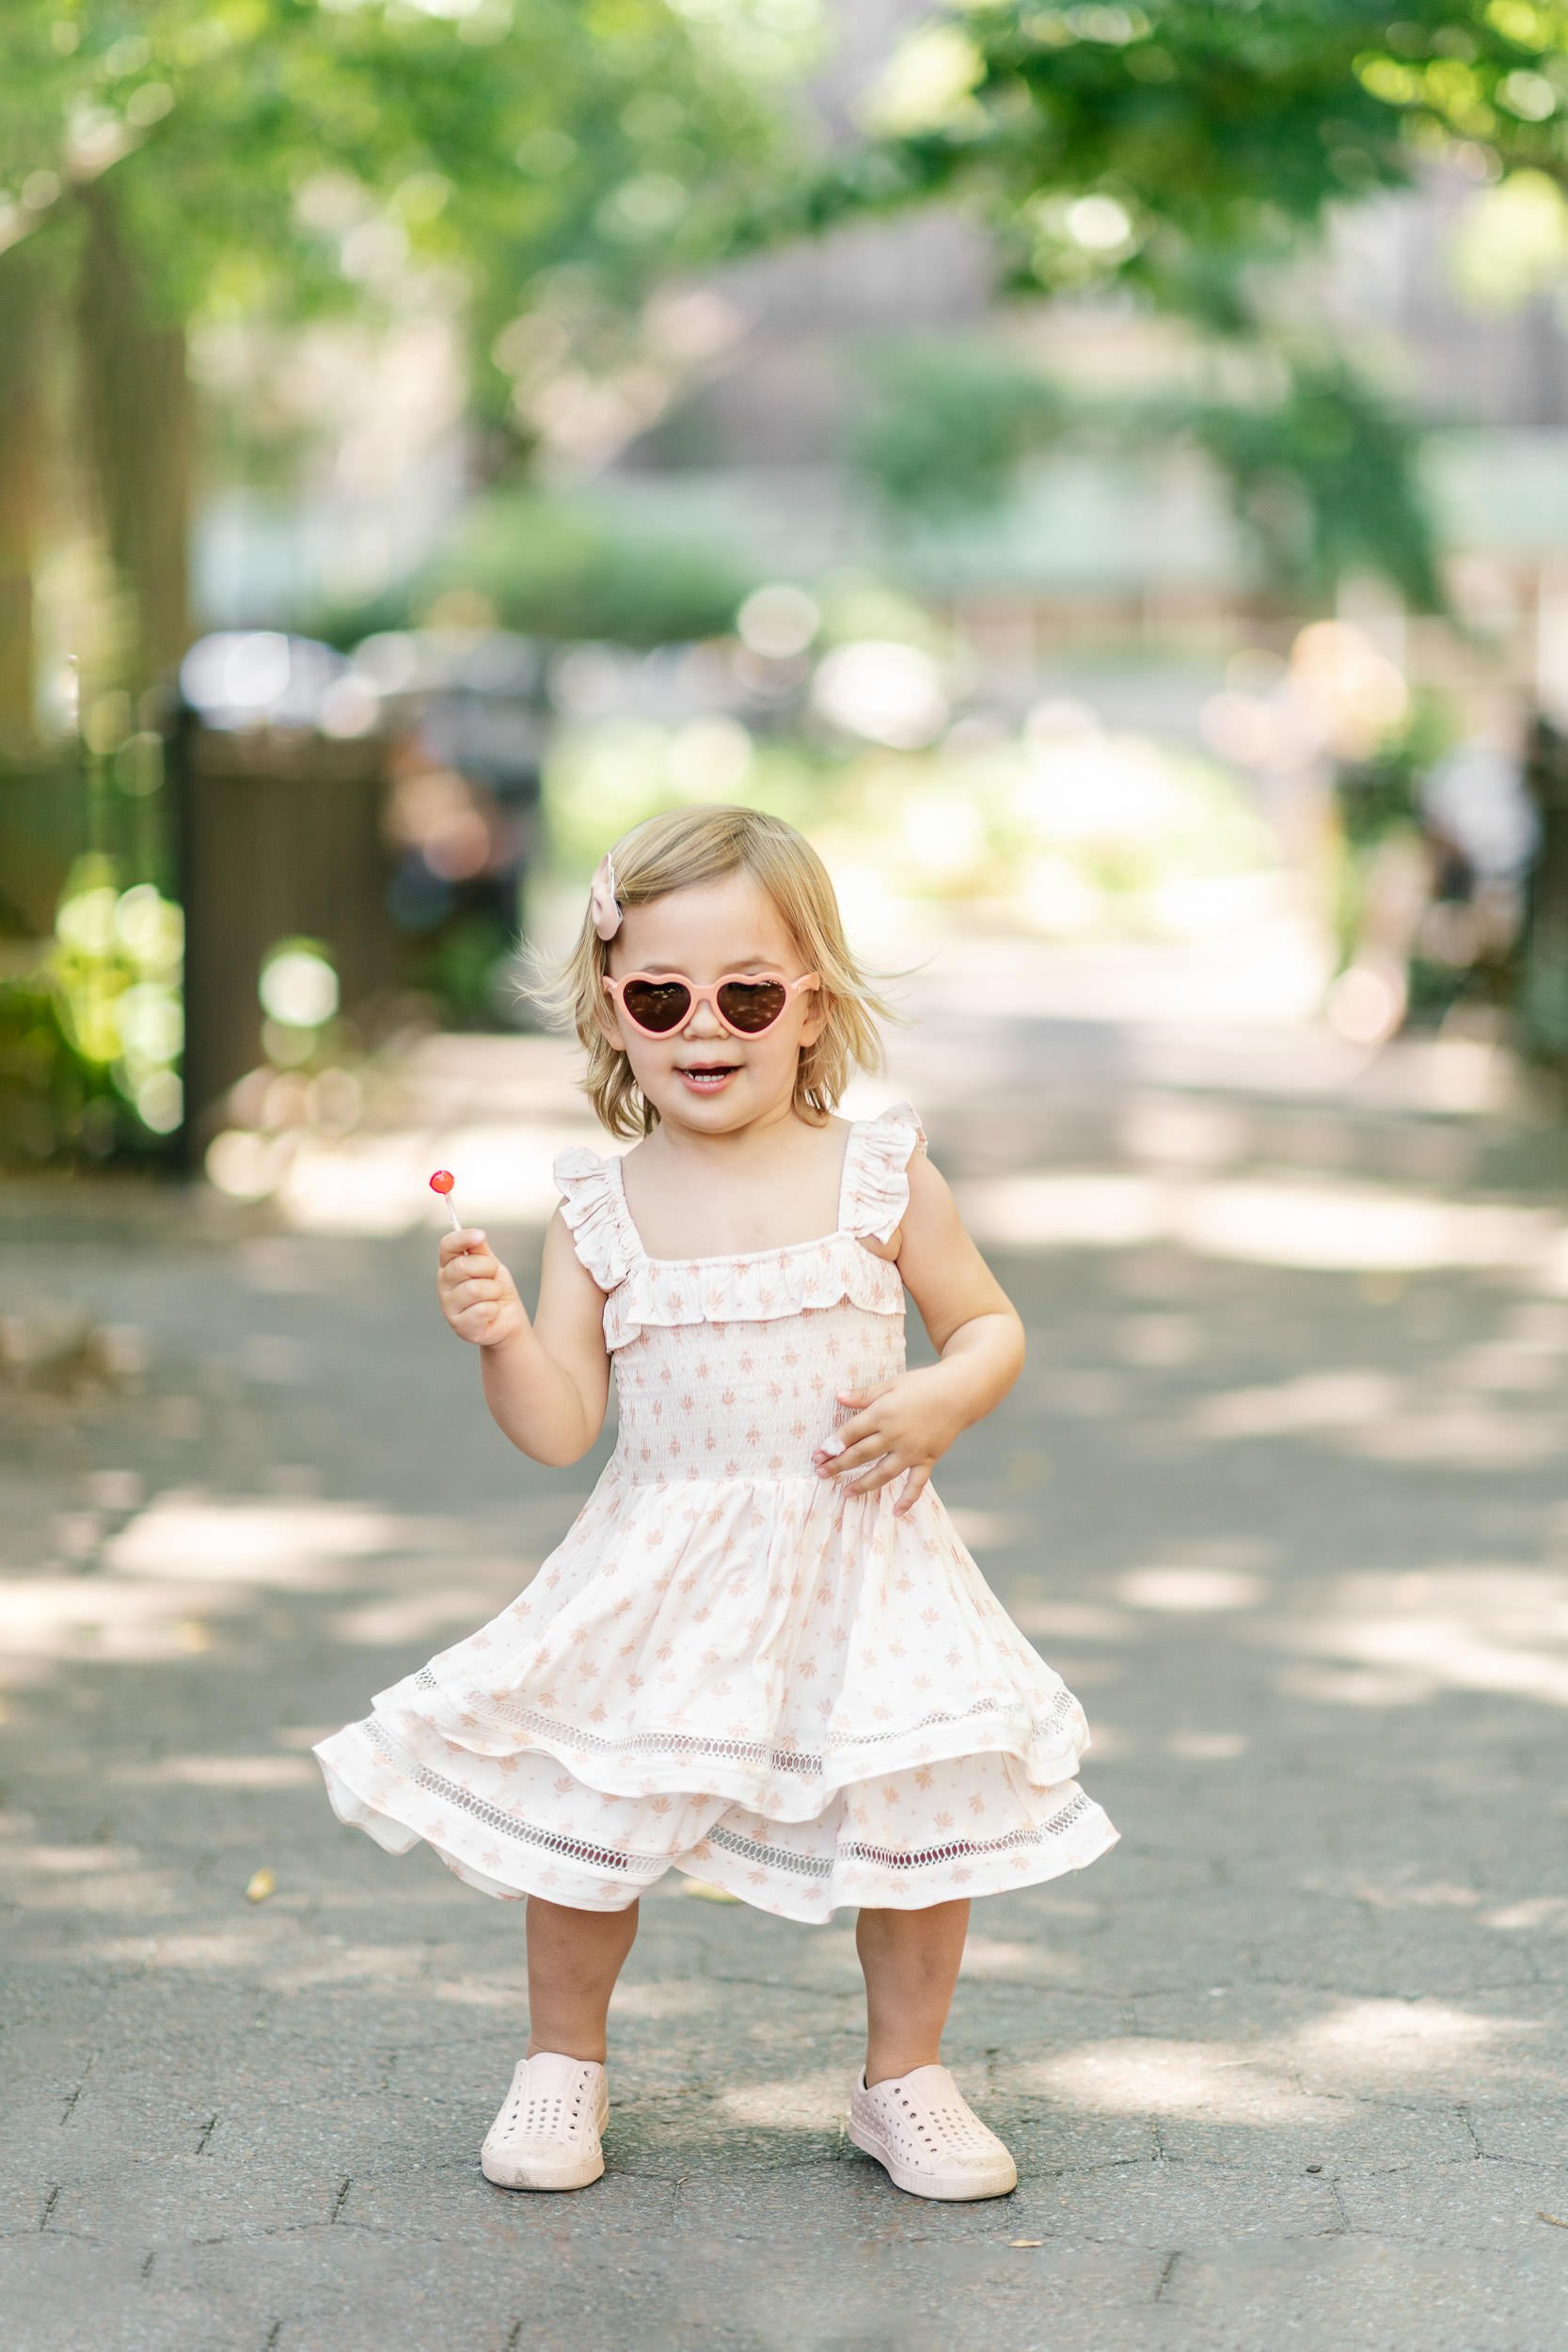  Outdoor portrait captured of a little girl wearing her sunglasses and dancing by Nicole Hawkins Photography. sassy toddler #NicoleHawkinsPhotograaphy #NicoleHawkinsChildren #NewYorkPortraits #KidsinNewYork #ChildrensPortraits #lifestyleportraits 